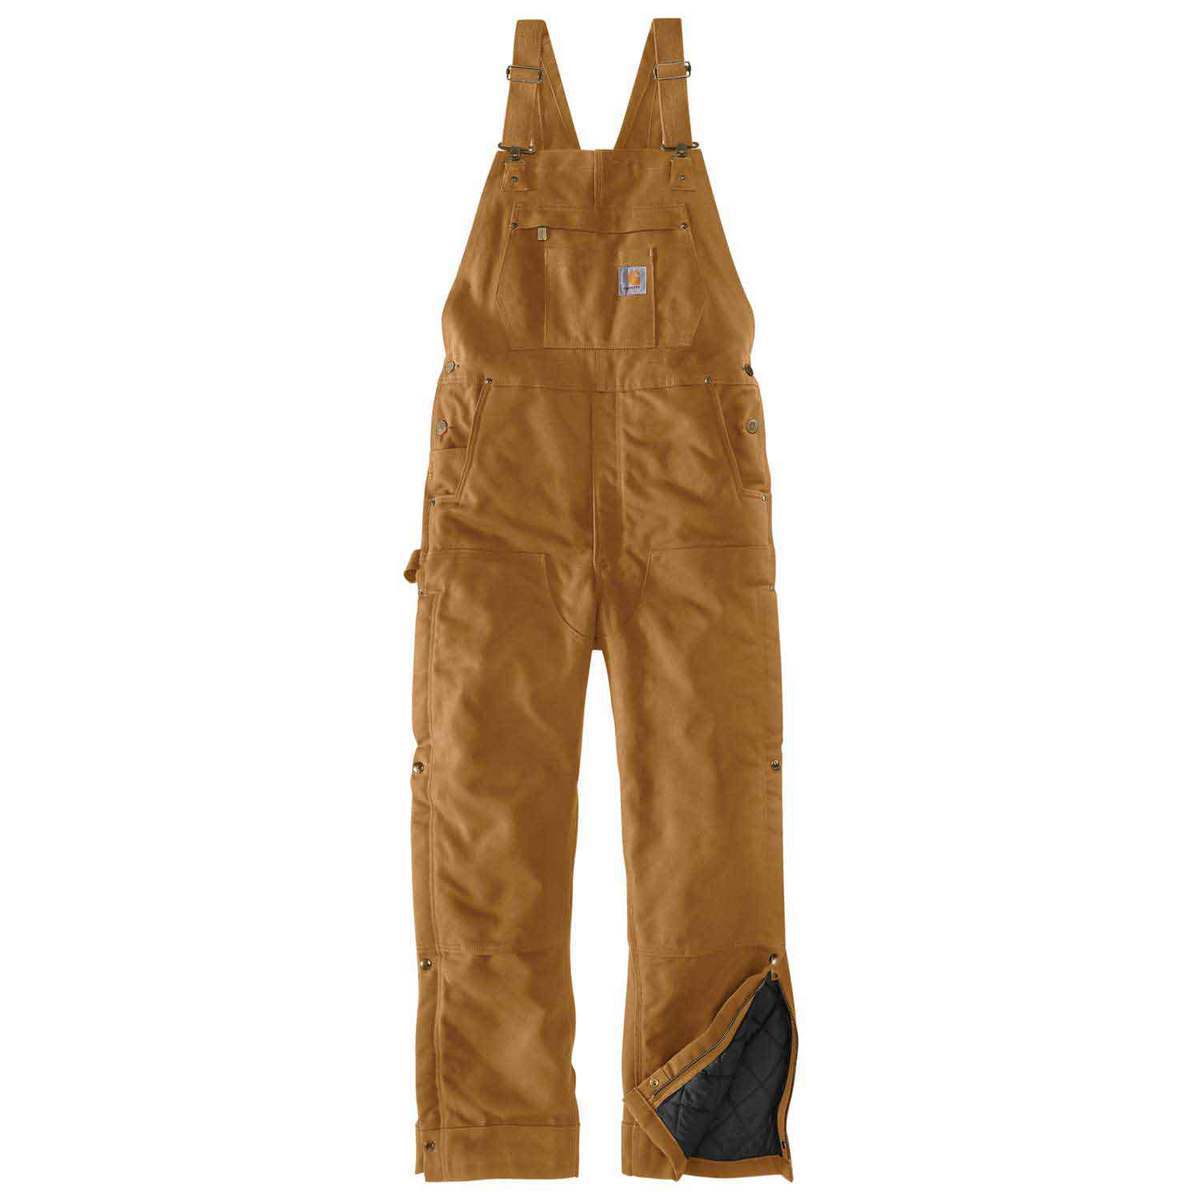 Carhartt Men's Duck Zip to Thigh Unlined Overall, R37 - Wilco Farm Stores